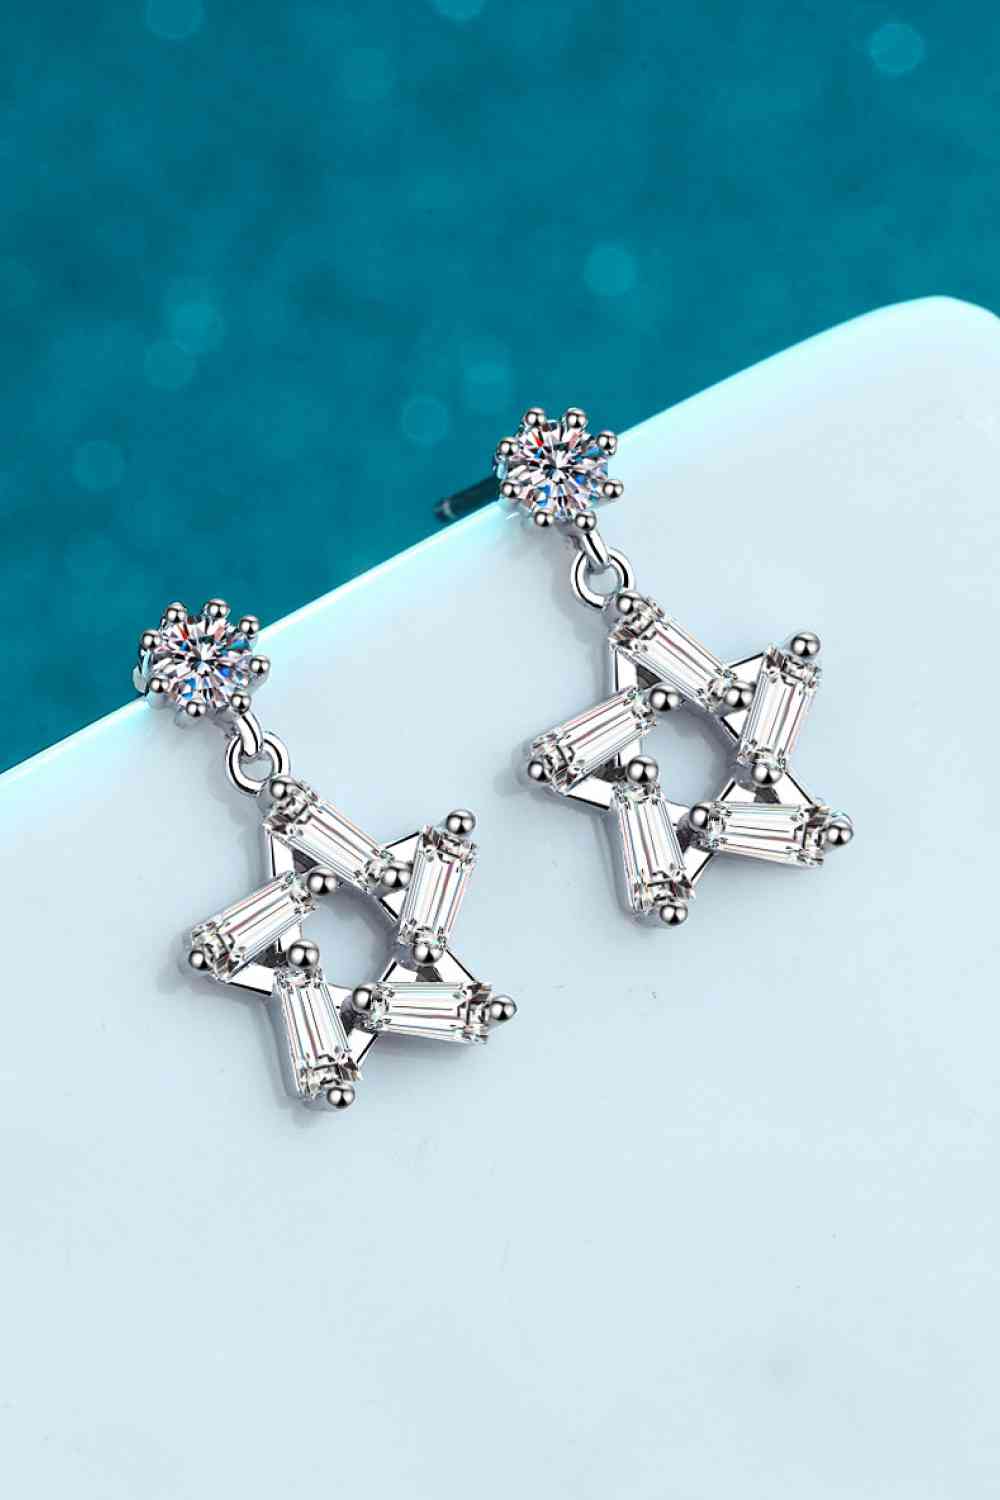 925 Sterling Silver Inlaid Moissanite Star Earrings - lolaluxeshop